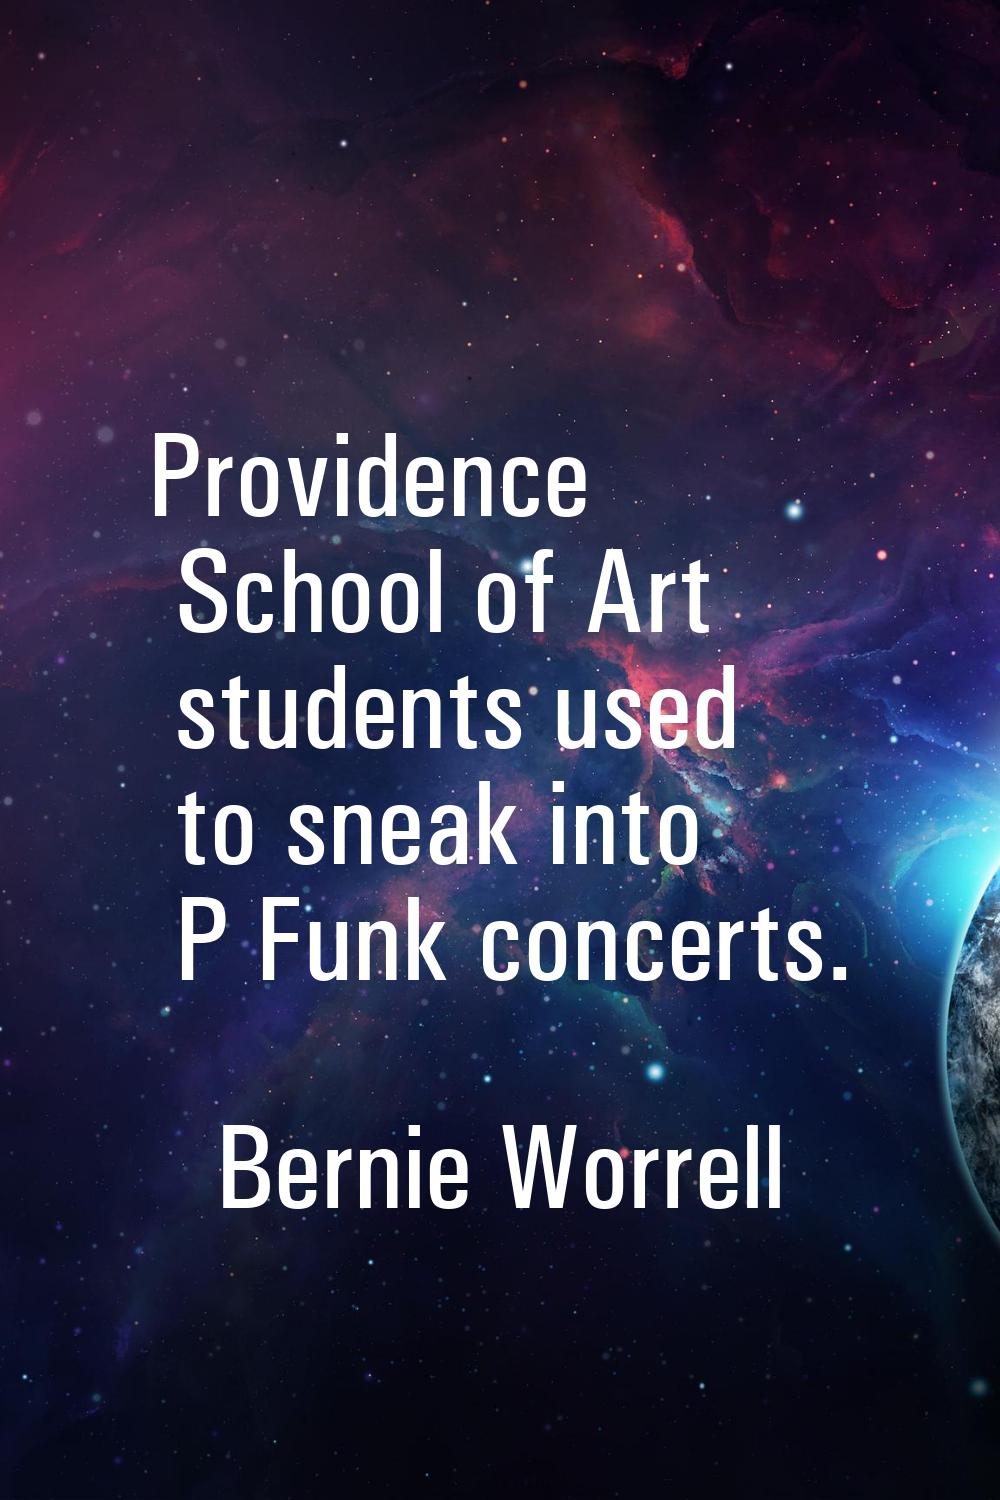 Providence School of Art students used to sneak into P Funk concerts.